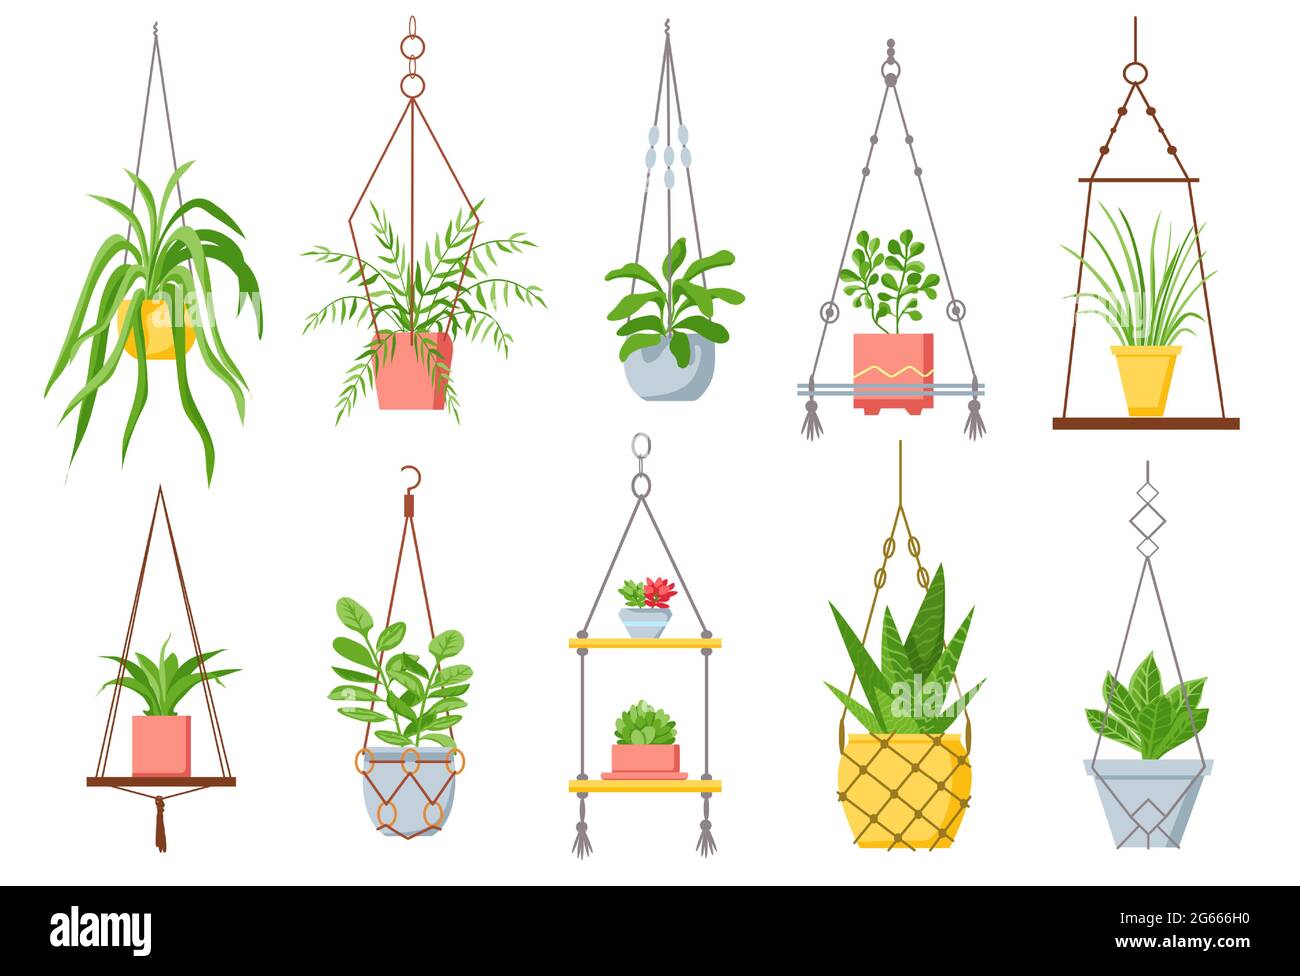 Home plant in hanging pot. Houseplant, succulent and cactus in pots on macrame rope. Decorative plants in cozy scandinavian style vector set Stock Vector